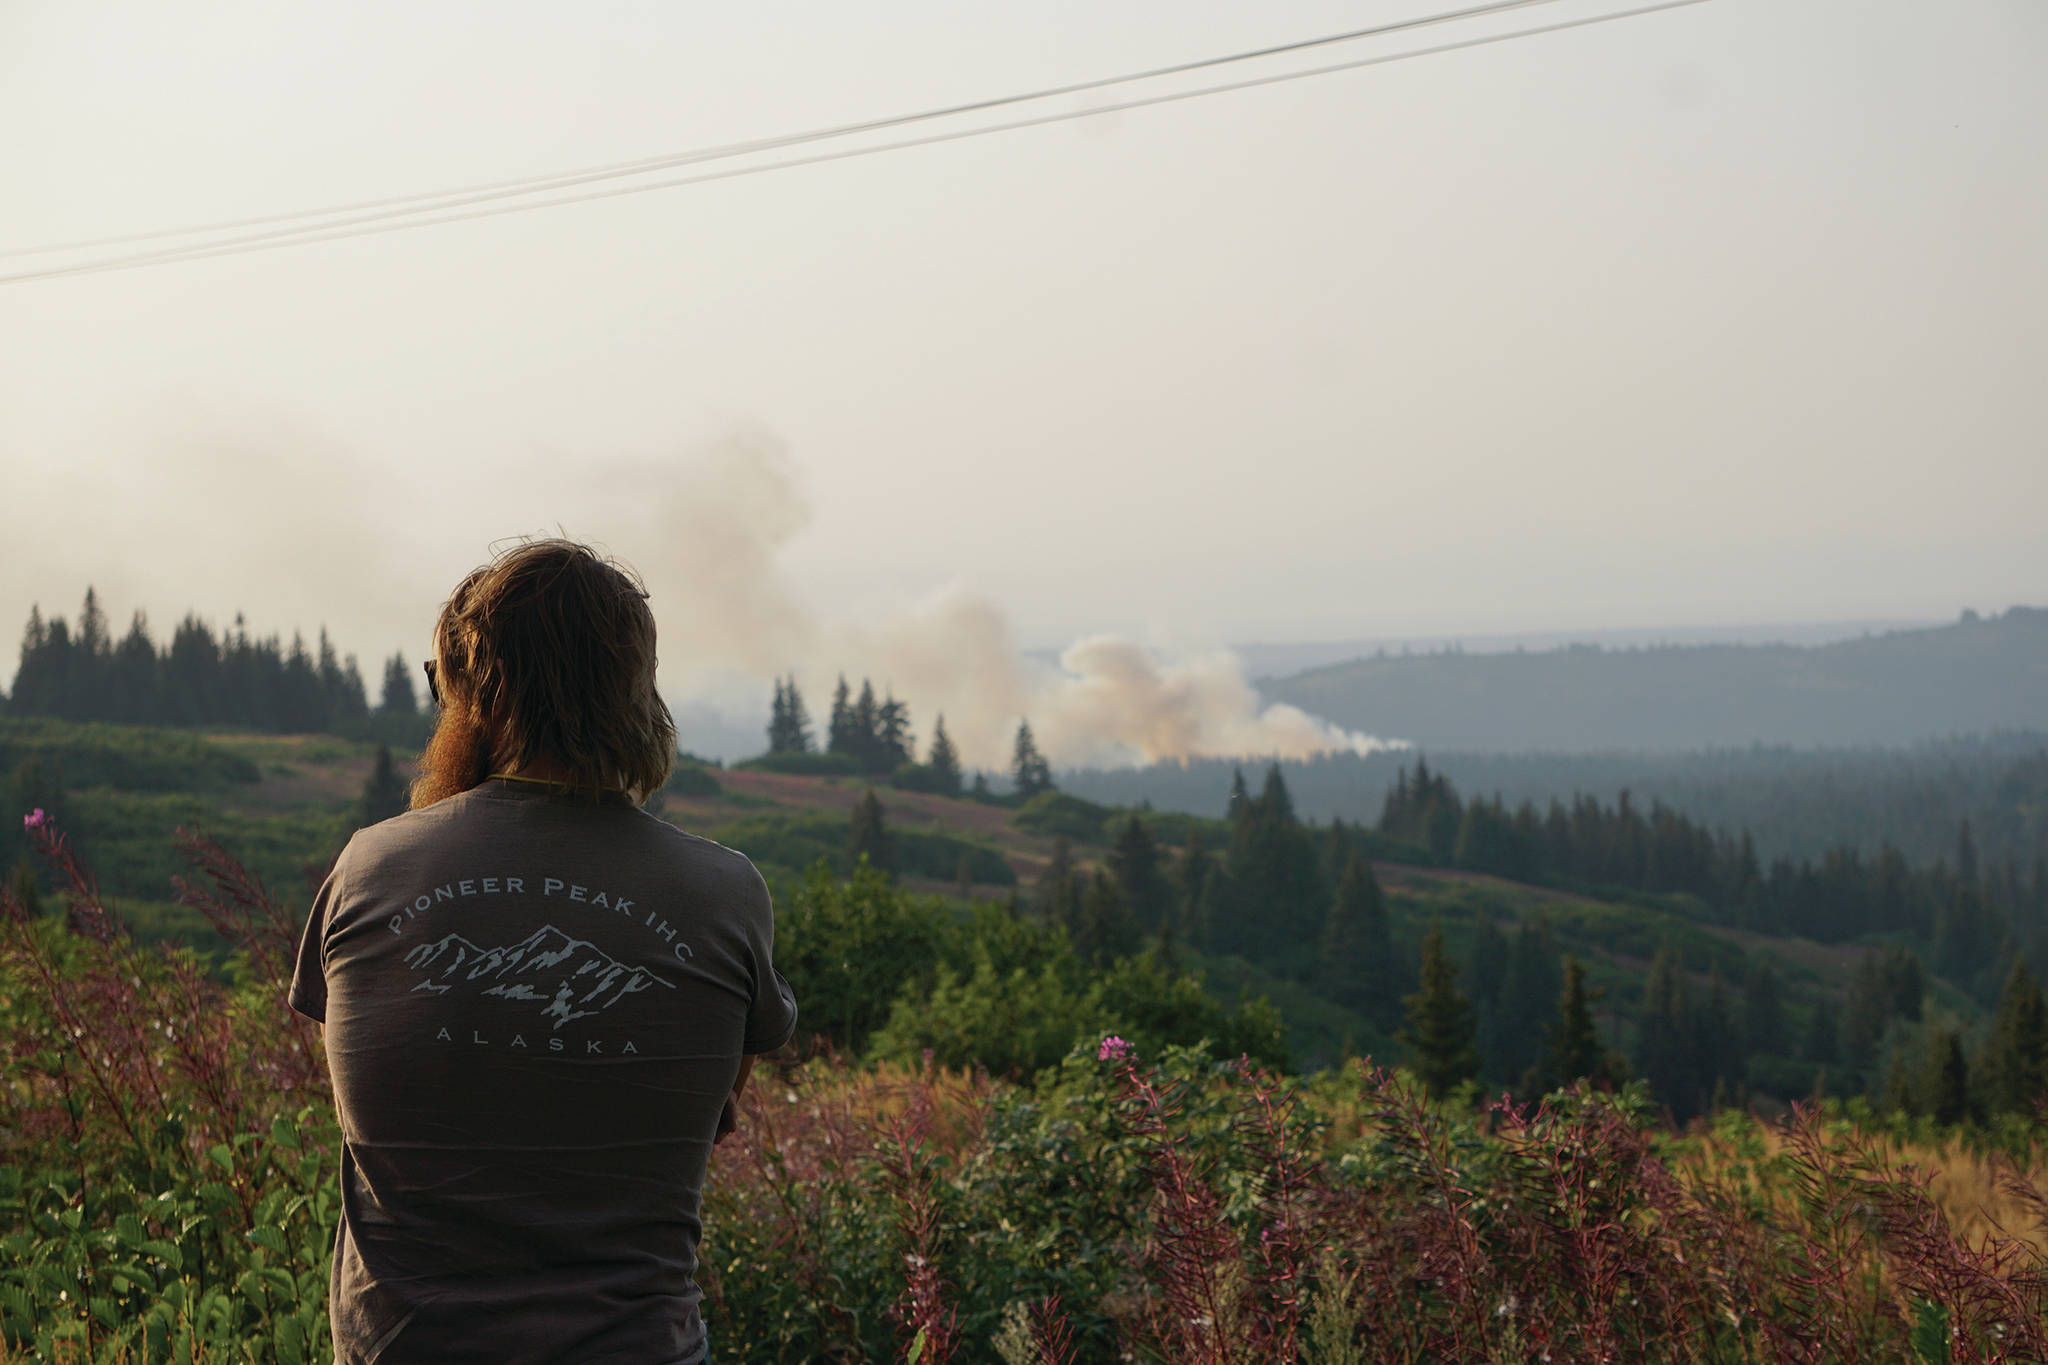 Diamond Ridge resident Parick Buongiorne watches the North Fork fire as it burns near the south end of the North Fork Road on Sunday evening, Aug. 18, 2019, near Homer, Alaska, as seen from Diamond Ridge Road. Buongiorne had previously worked as a wildlife firefighter with the Pioneer Peak crew. (Photo by Michael Armstrong/Homer News)